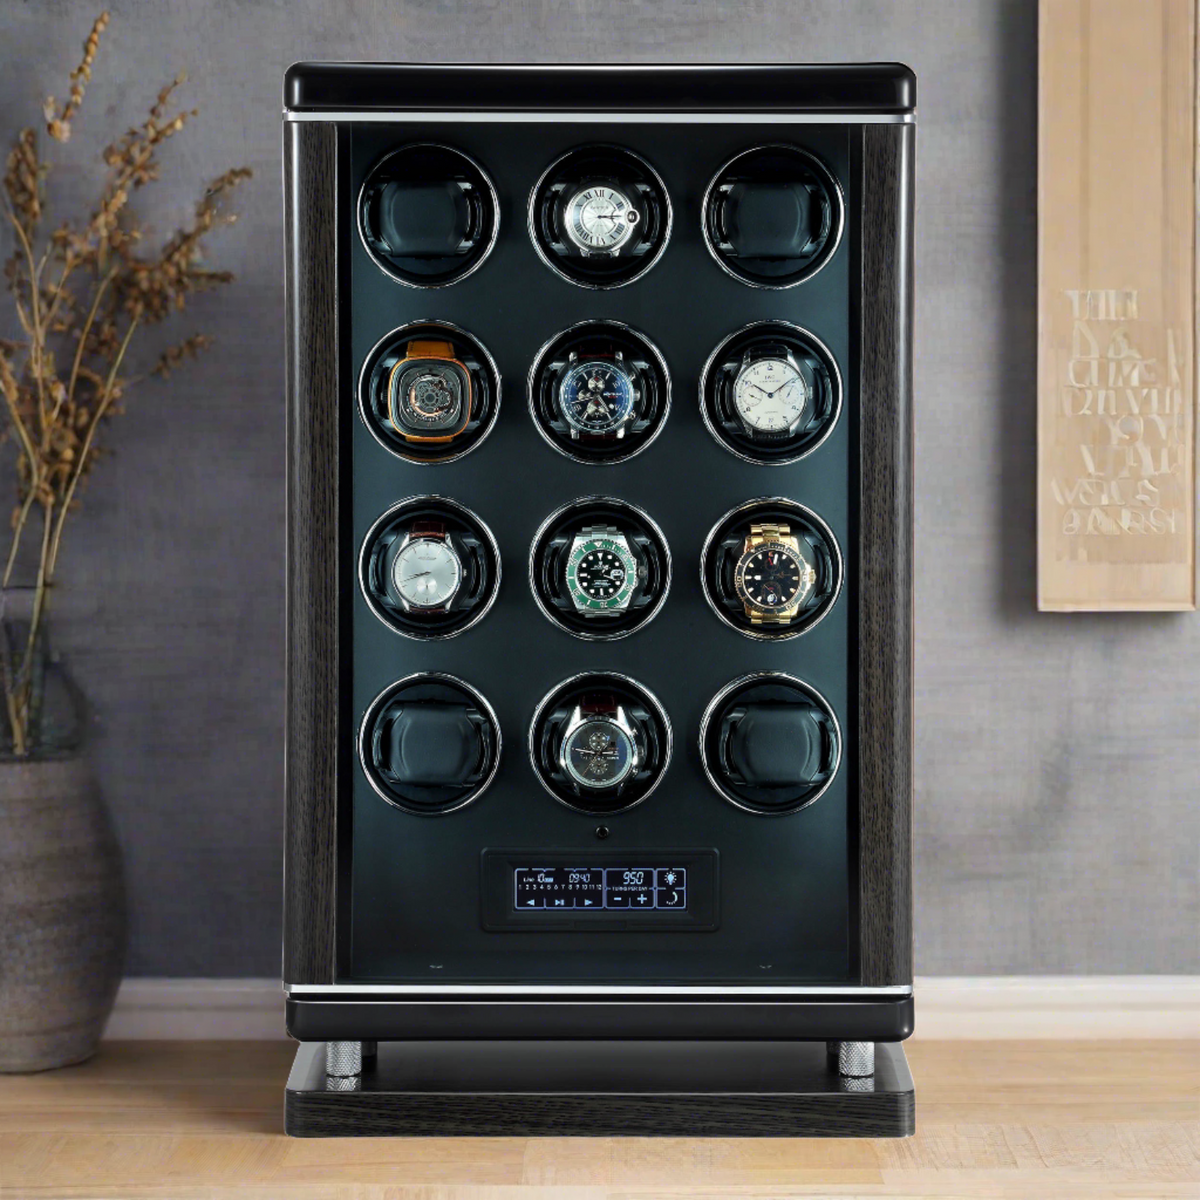 12 Watch Winder for Automatic Watches for men with BioMetric Technology by Tempus